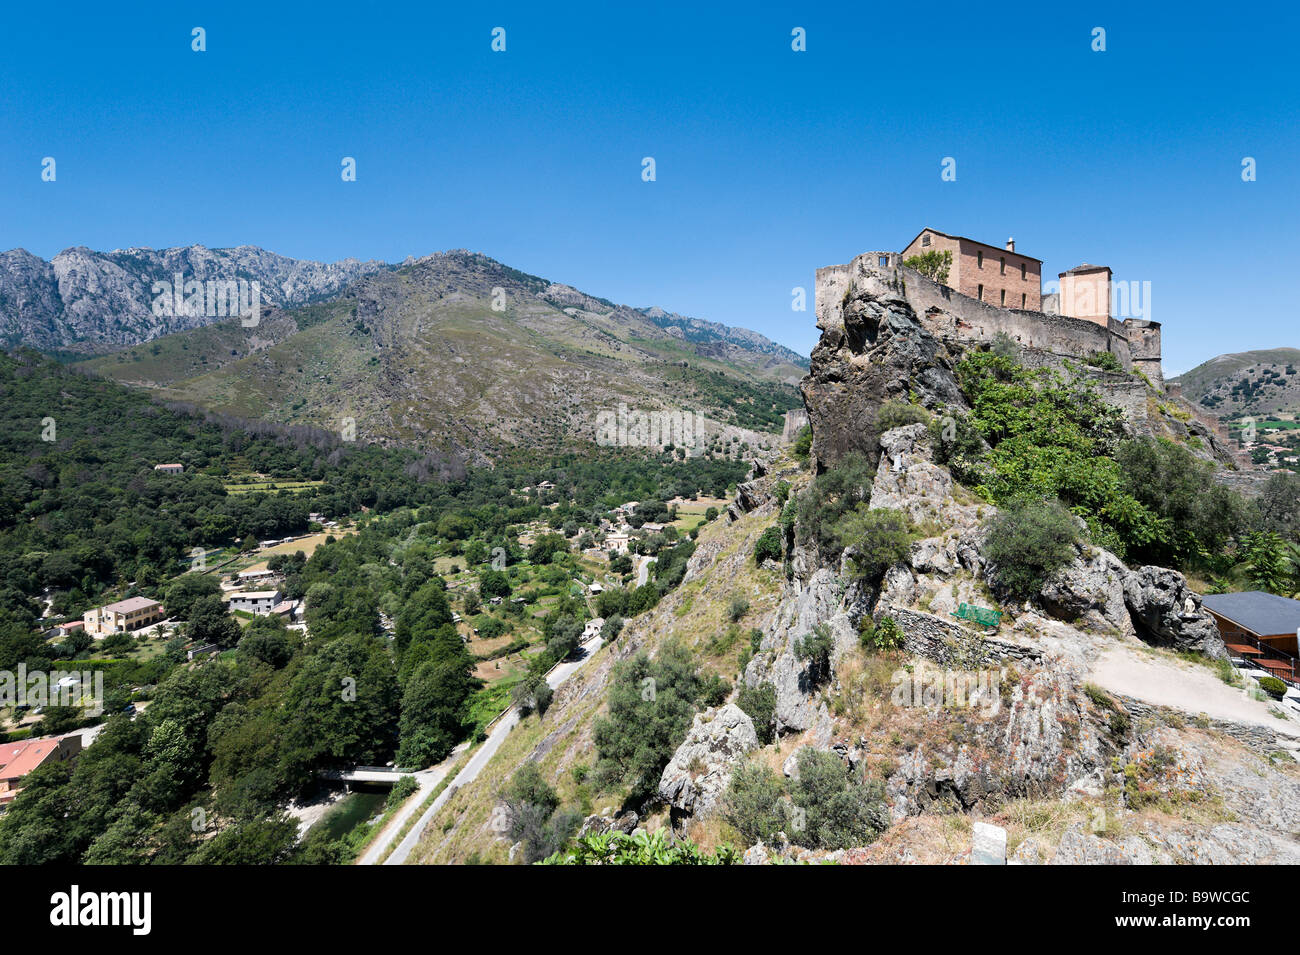 The citadelle in the haute ville (old town), Corte (the former independent capital), Central Corsica, France Stock Photo